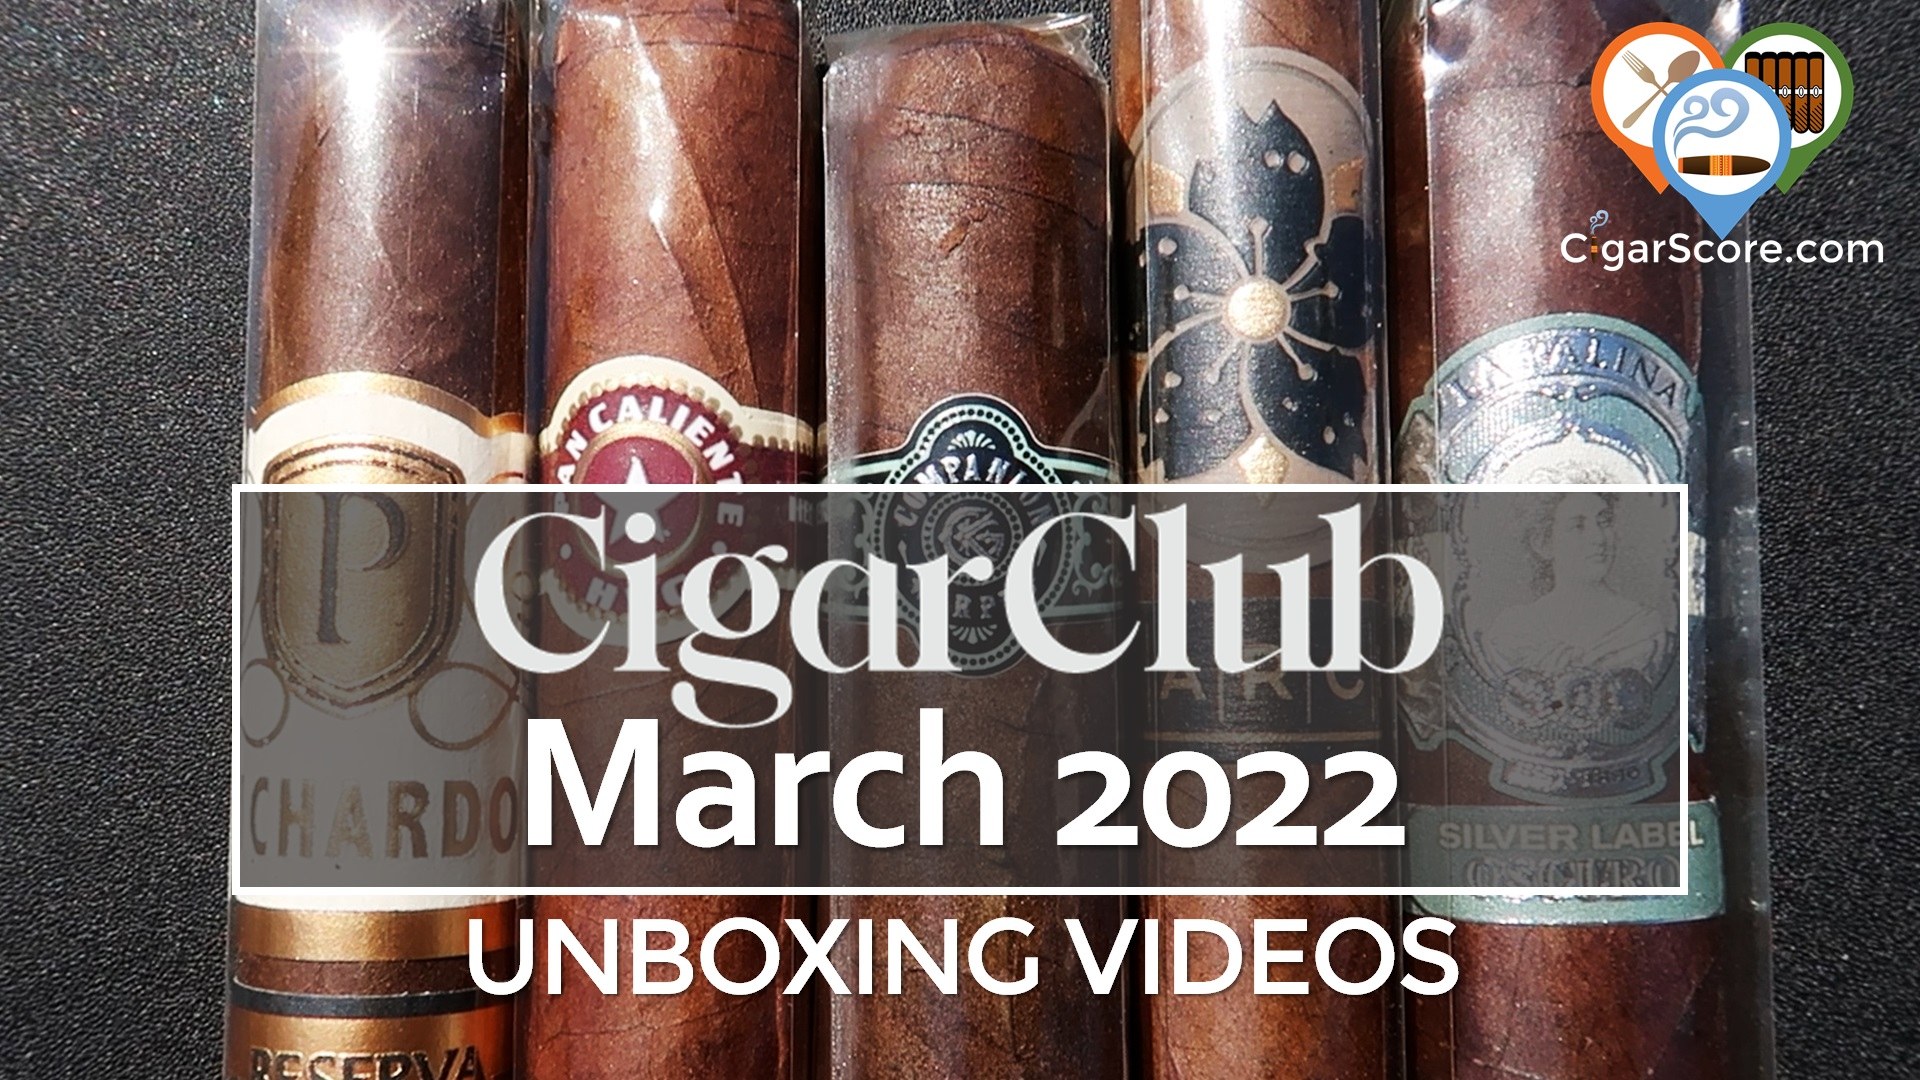 Unboxing CigarClub 2022 March